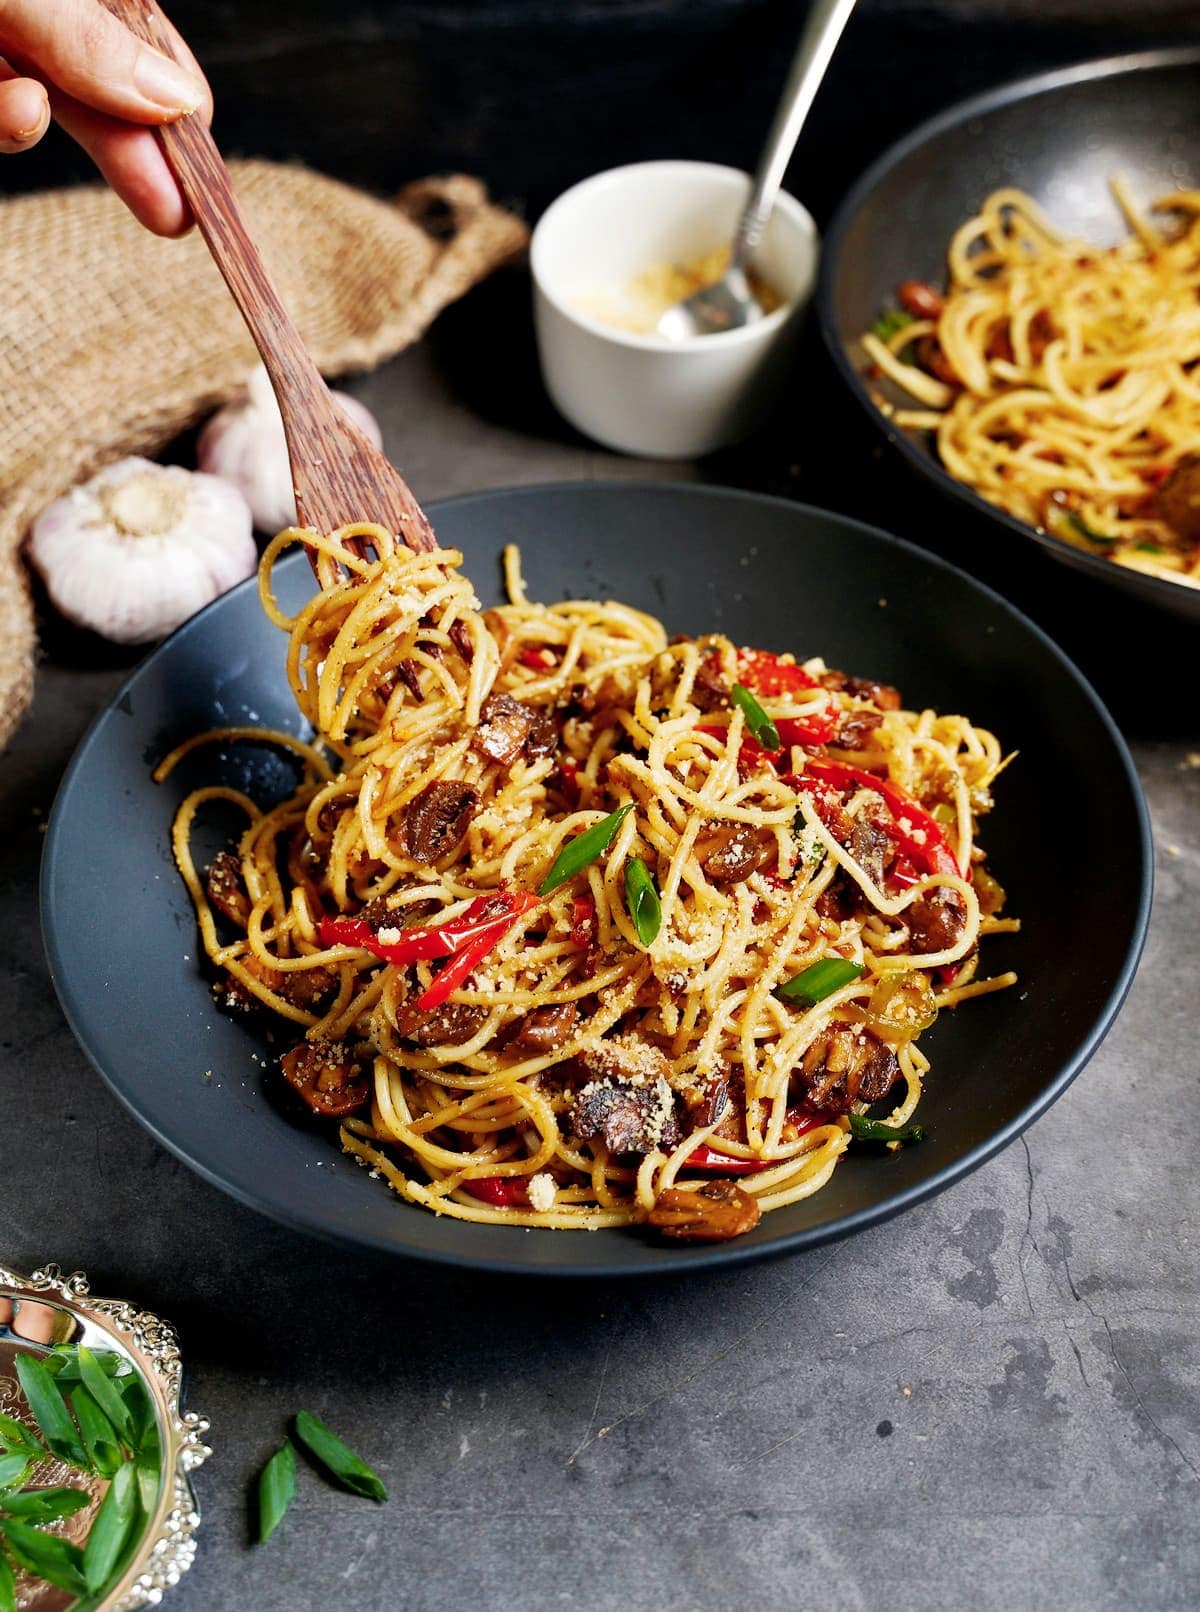 garlic noodles with mushrooms and peppers in black bowl with fork